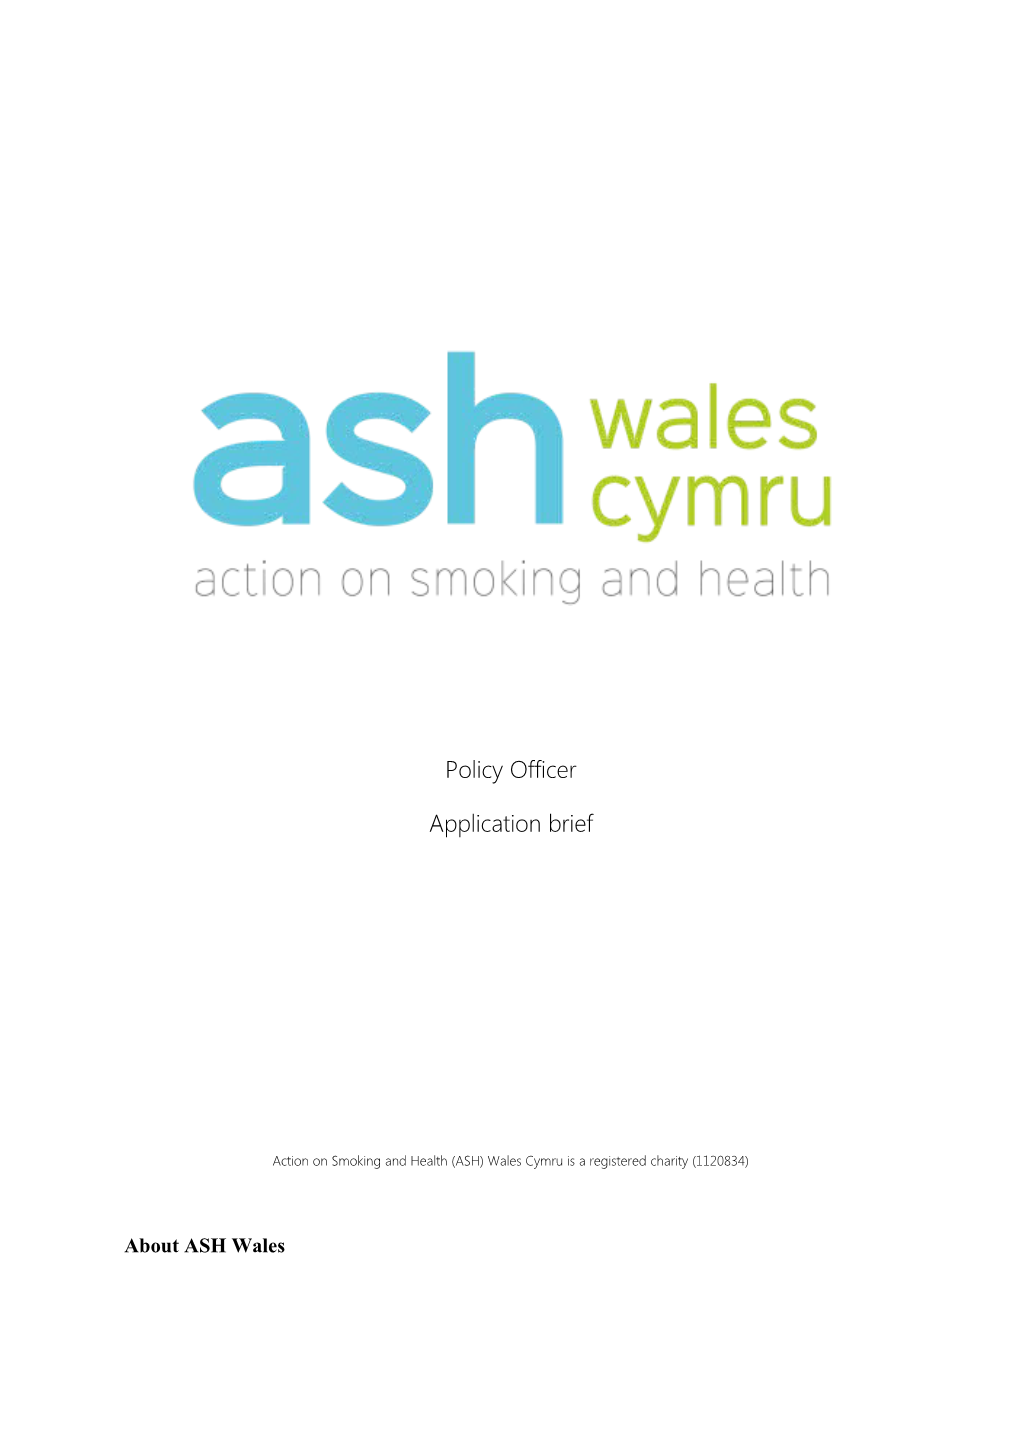 Action on Smoking and Health (ASH) Wales Cymru Is a Registered Charity (1120834)